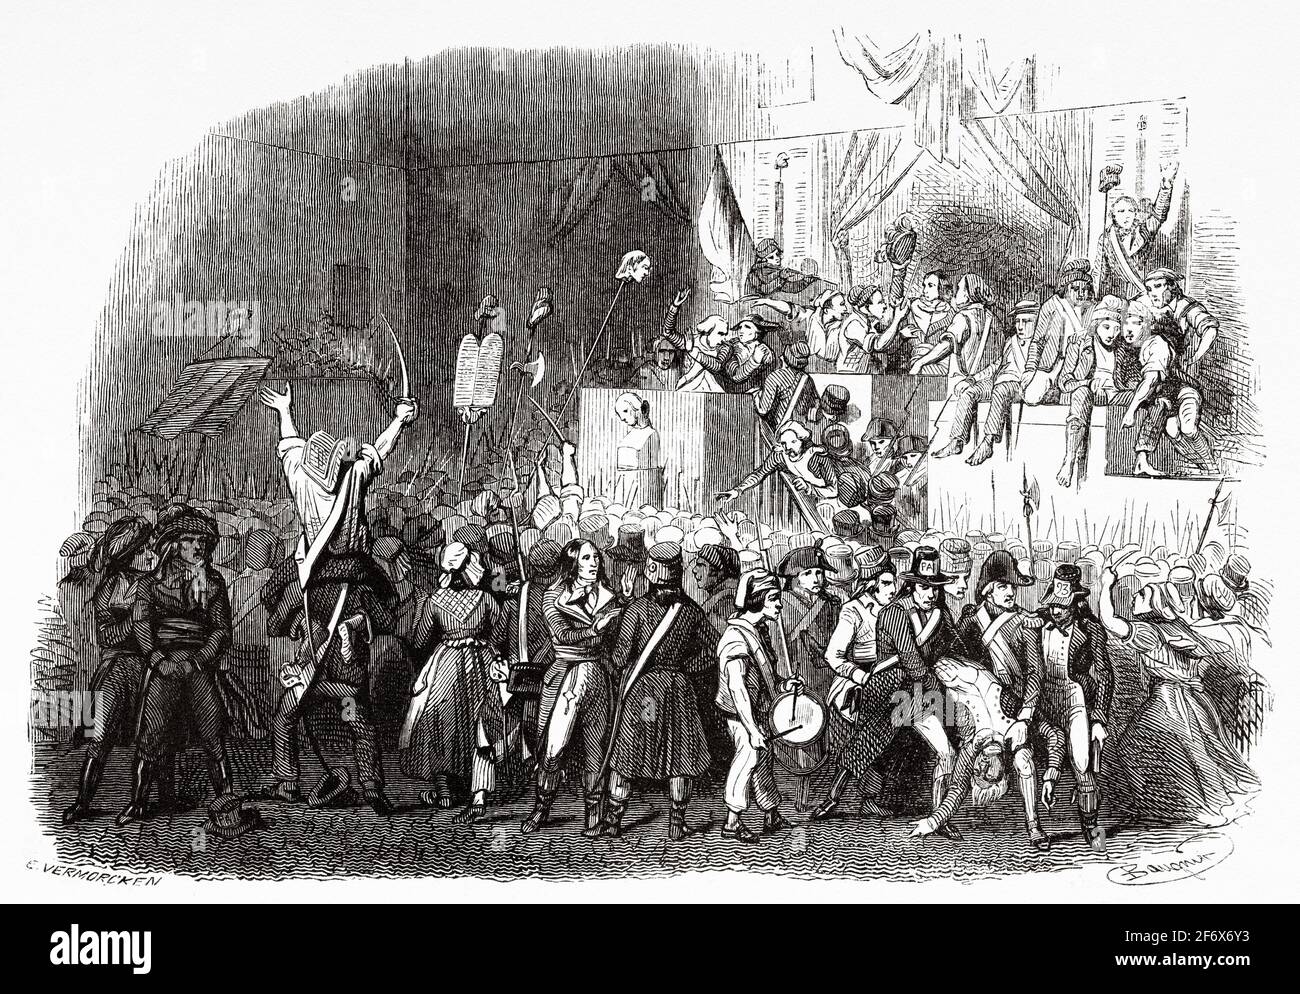 Boissy d'Anglas salutes the head of the deputy Feraud presented to him on a pike, May 20, 1795. France, French Revolution 18th century. Old engraved illustration from Histoire de la Revolution Francaise 1845 Stock Photo